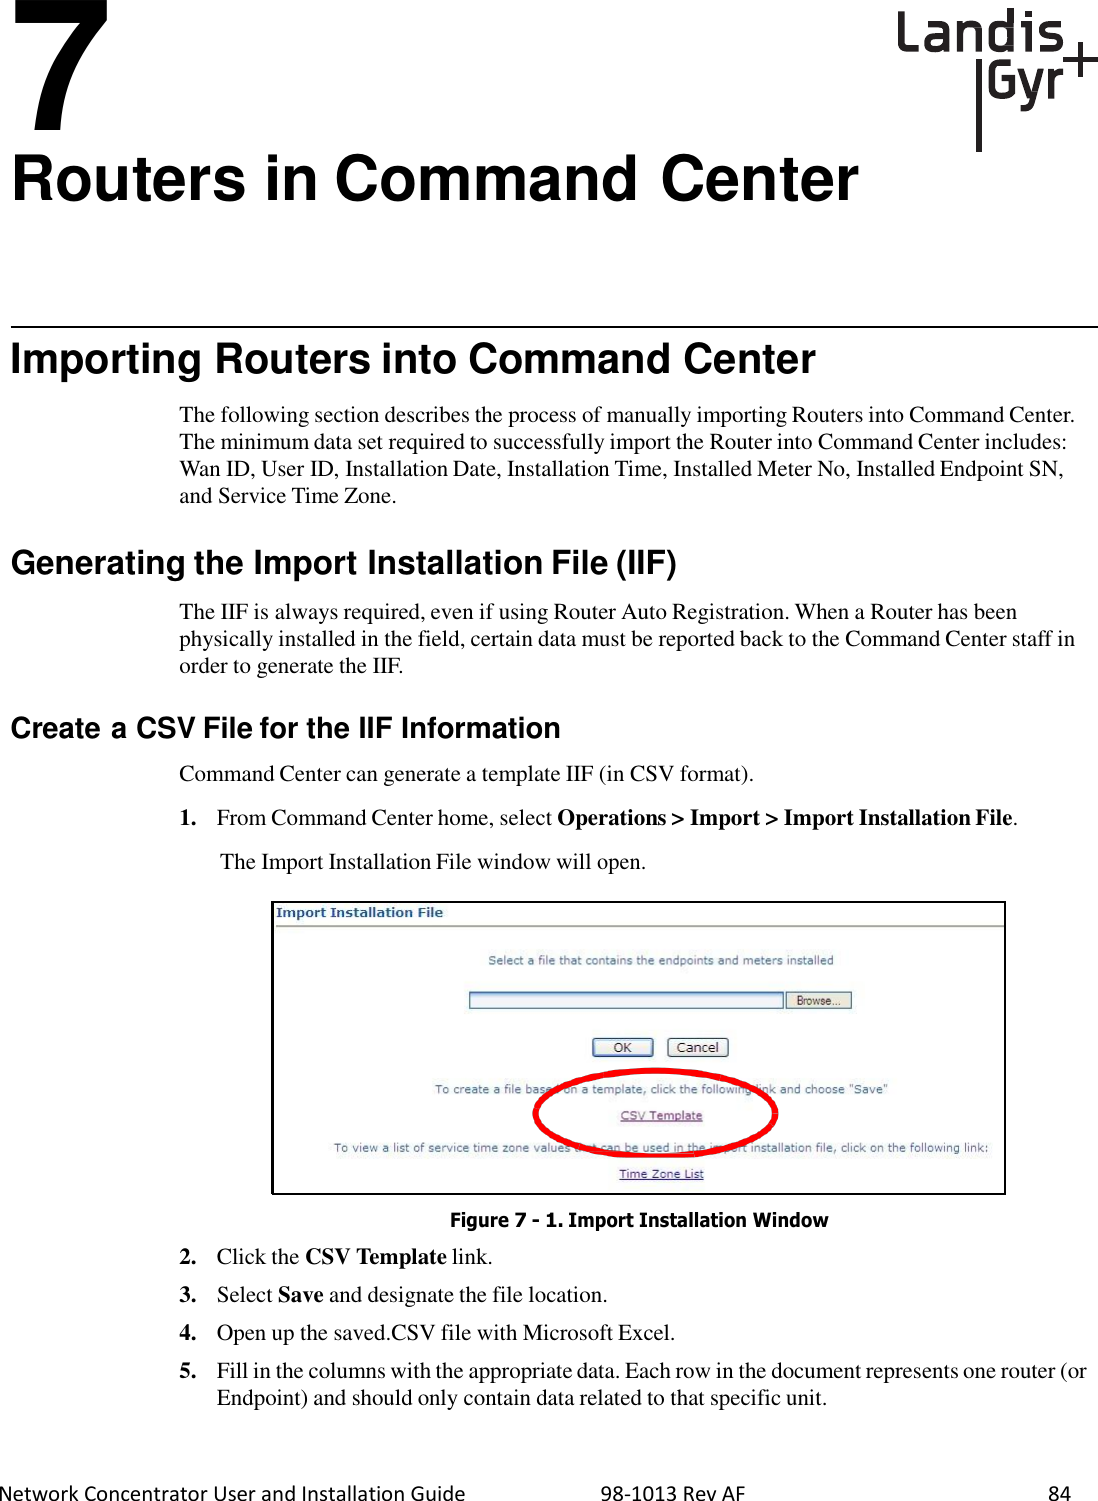  Network Concentrator User and Installation Guide                          98-1013 Rev AF    84     7 Routers in Command Center       Importing Routers into Command Center  The following section describes the process of manually importing Routers into Command Center. The minimum data set required to successfully import the Router into Command Center includes: Wan ID, User ID, Installation Date, Installation Time, Installed Meter No, Installed Endpoint SN, and Service Time Zone.   Generating the Import Installation File (IIF)  The IIF is always required, even if using Router Auto Registration. When a Router has been physically installed in the field, certain data must be reported back to the Command Center staff in order to generate the IIF.   Create a CSV File for the IIF Information  Command Center can generate a template IIF (in CSV format).  1.   From Command Center home, select Operations &gt; Import &gt; Import Installation File.  The Import Installation File window will open.                 Figure 7 - 1. Import Installation Window  2.   Click the CSV Template link.  3.   Select Save and designate the file location.  4.   Open up the saved.CSV file with Microsoft Excel.  5.   Fill in the columns with the appropriate data. Each row in the document represents one router (or Endpoint) and should only contain data related to that specific unit. 